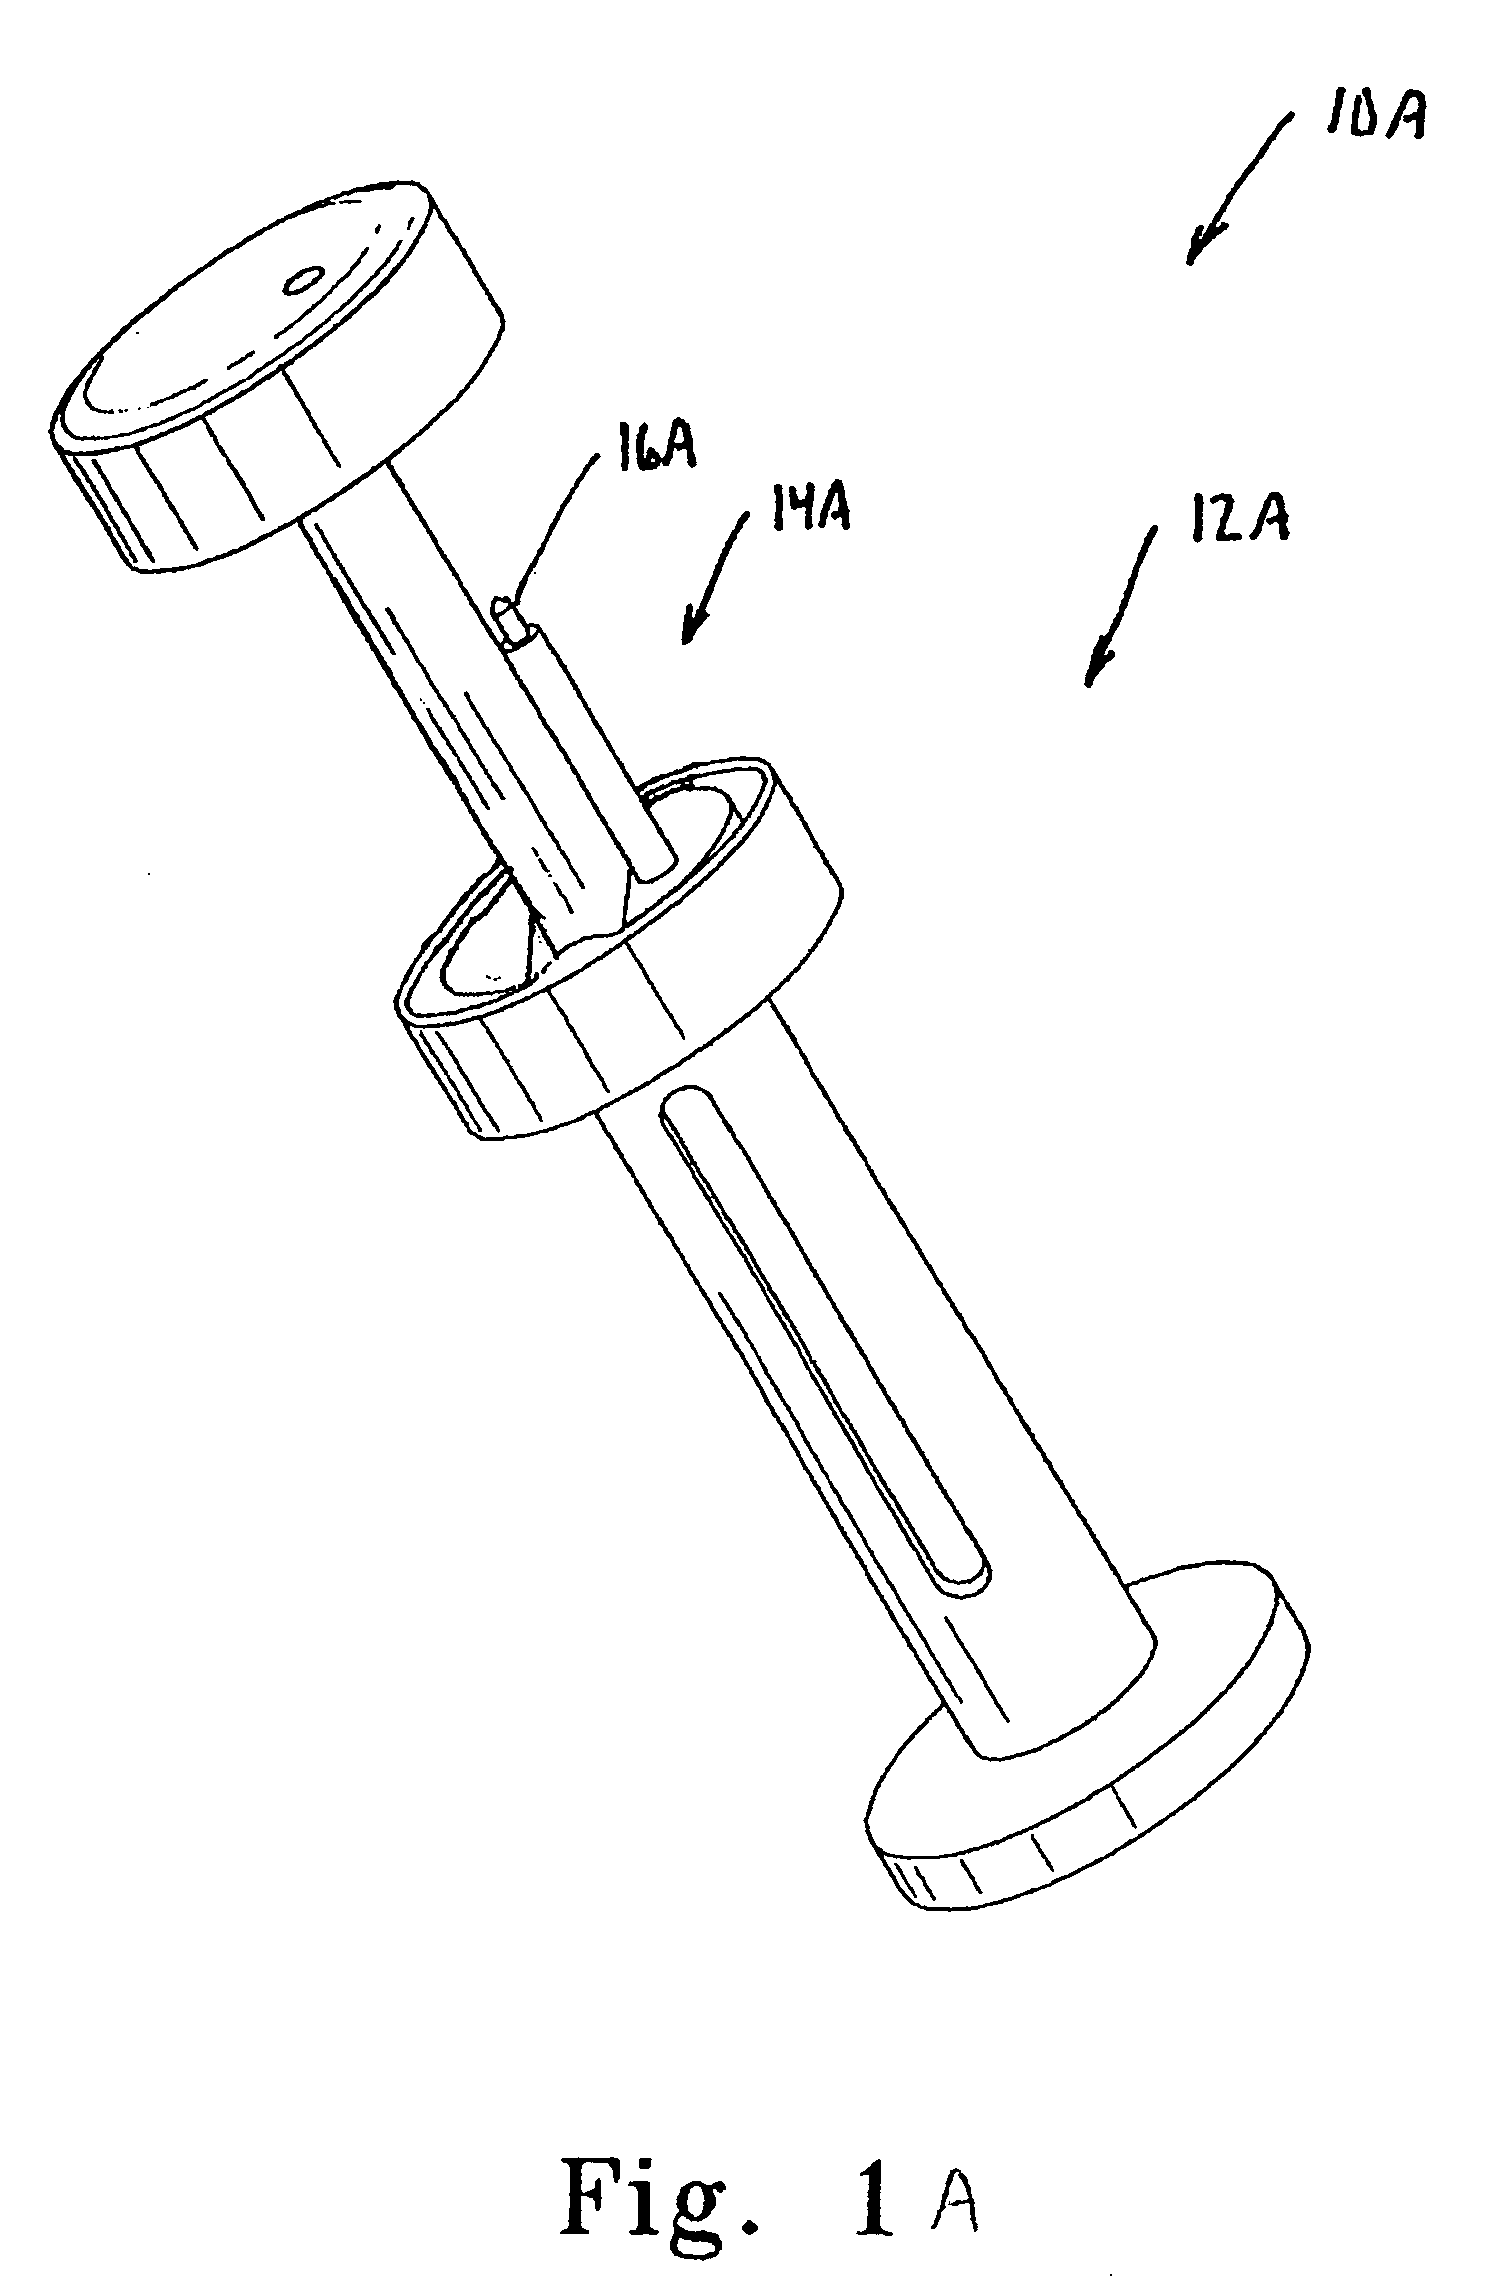 Suture anchor cartridge holder, suture anchor cartridge and associated method